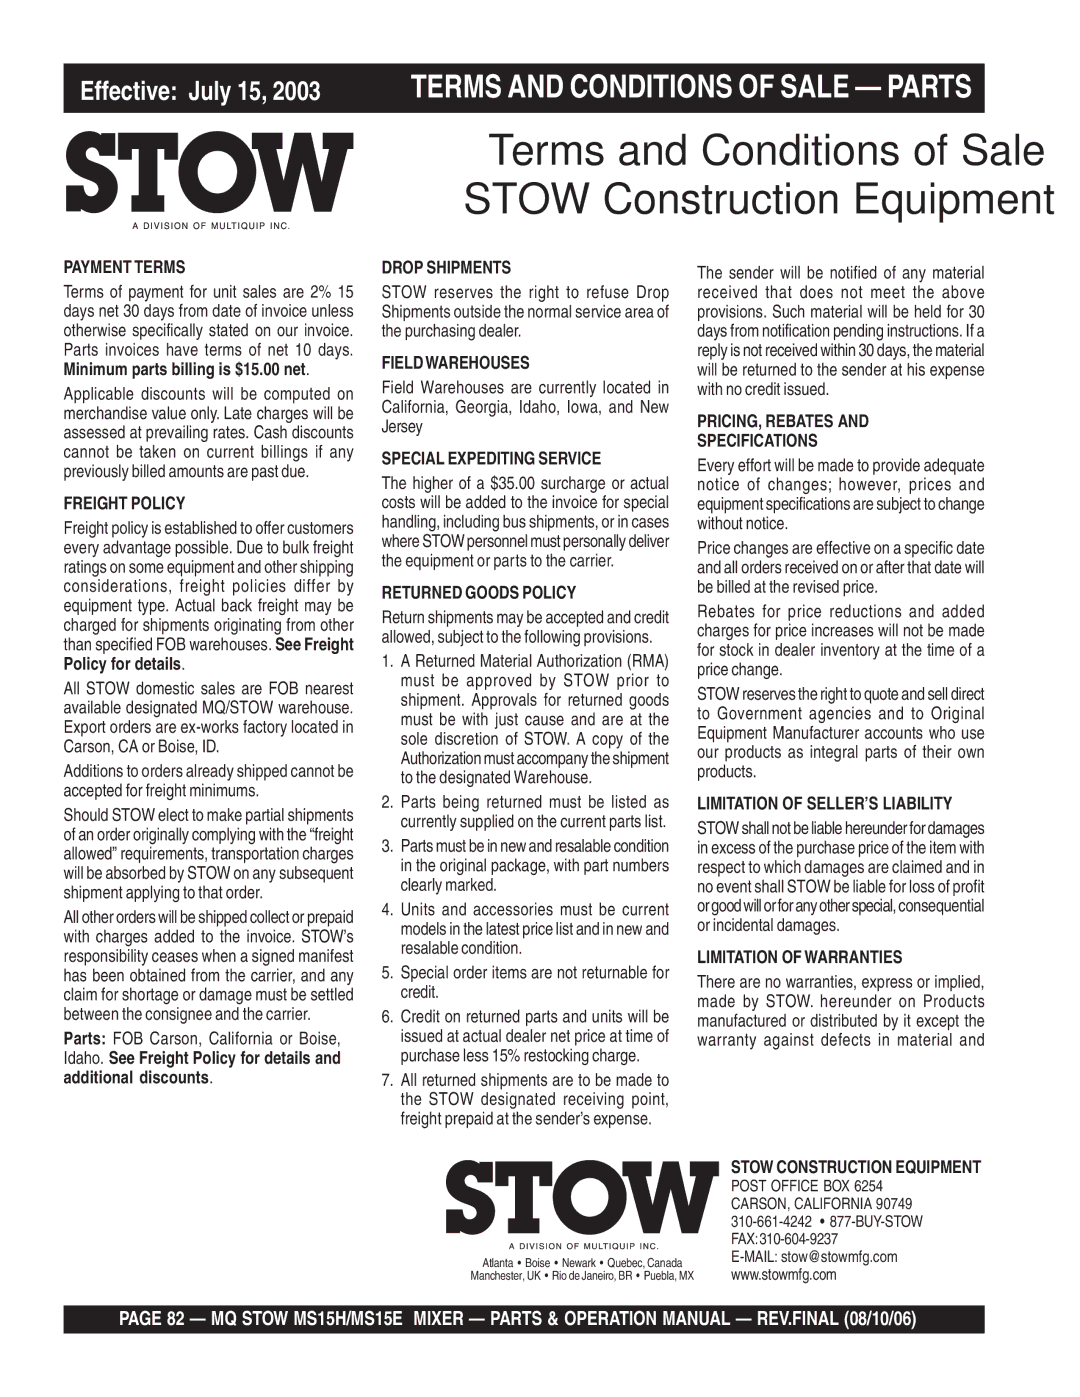 Stow MS15H5.5, MS15E manual Terms and Conditions of Sale Stow Construction Equipment 